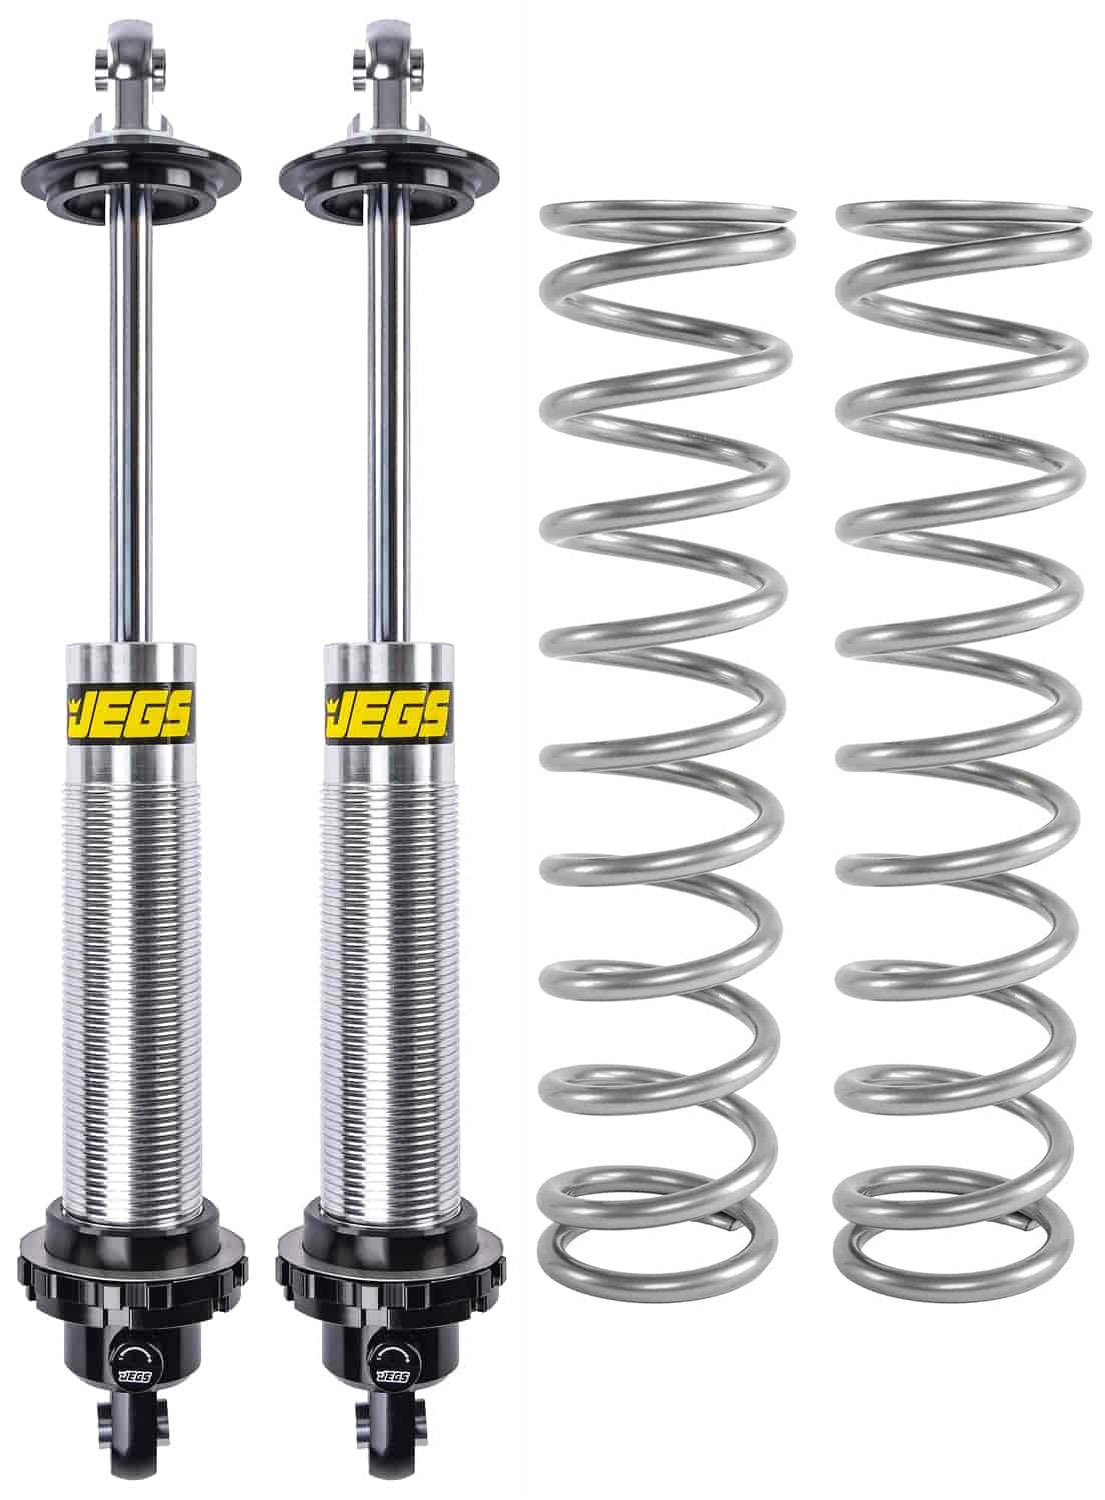 Single Adjustable Coil-Over Shocks and Coil-Over Springs Kit